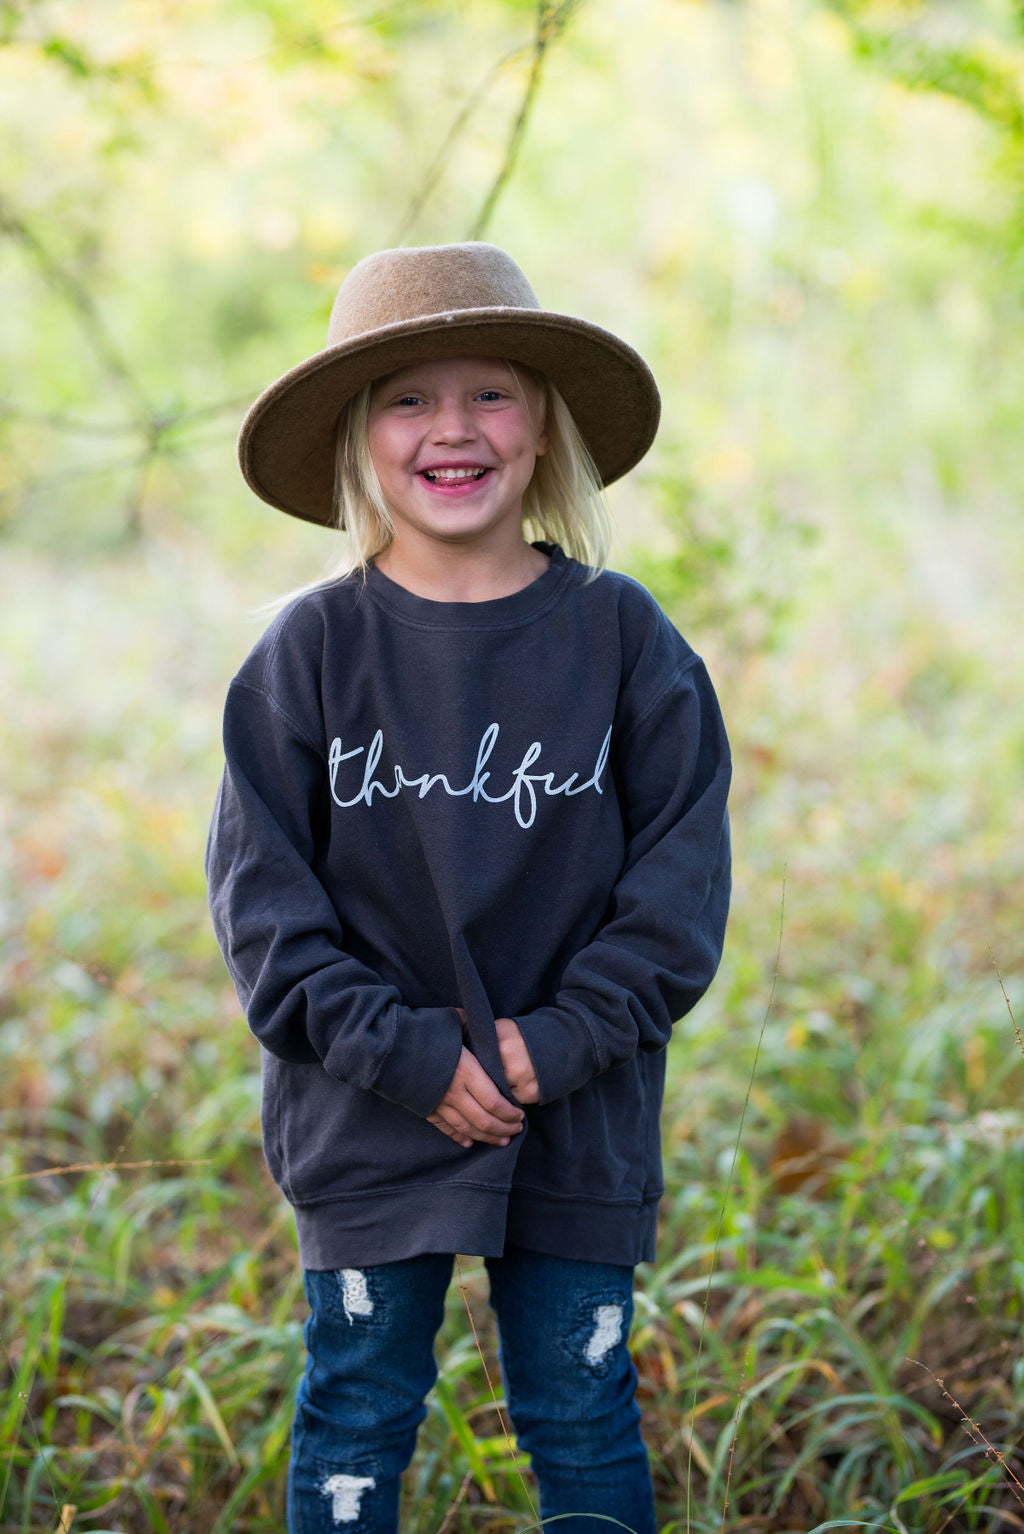 Thankful Sweatshirt - Youth and Adult Sizes Available